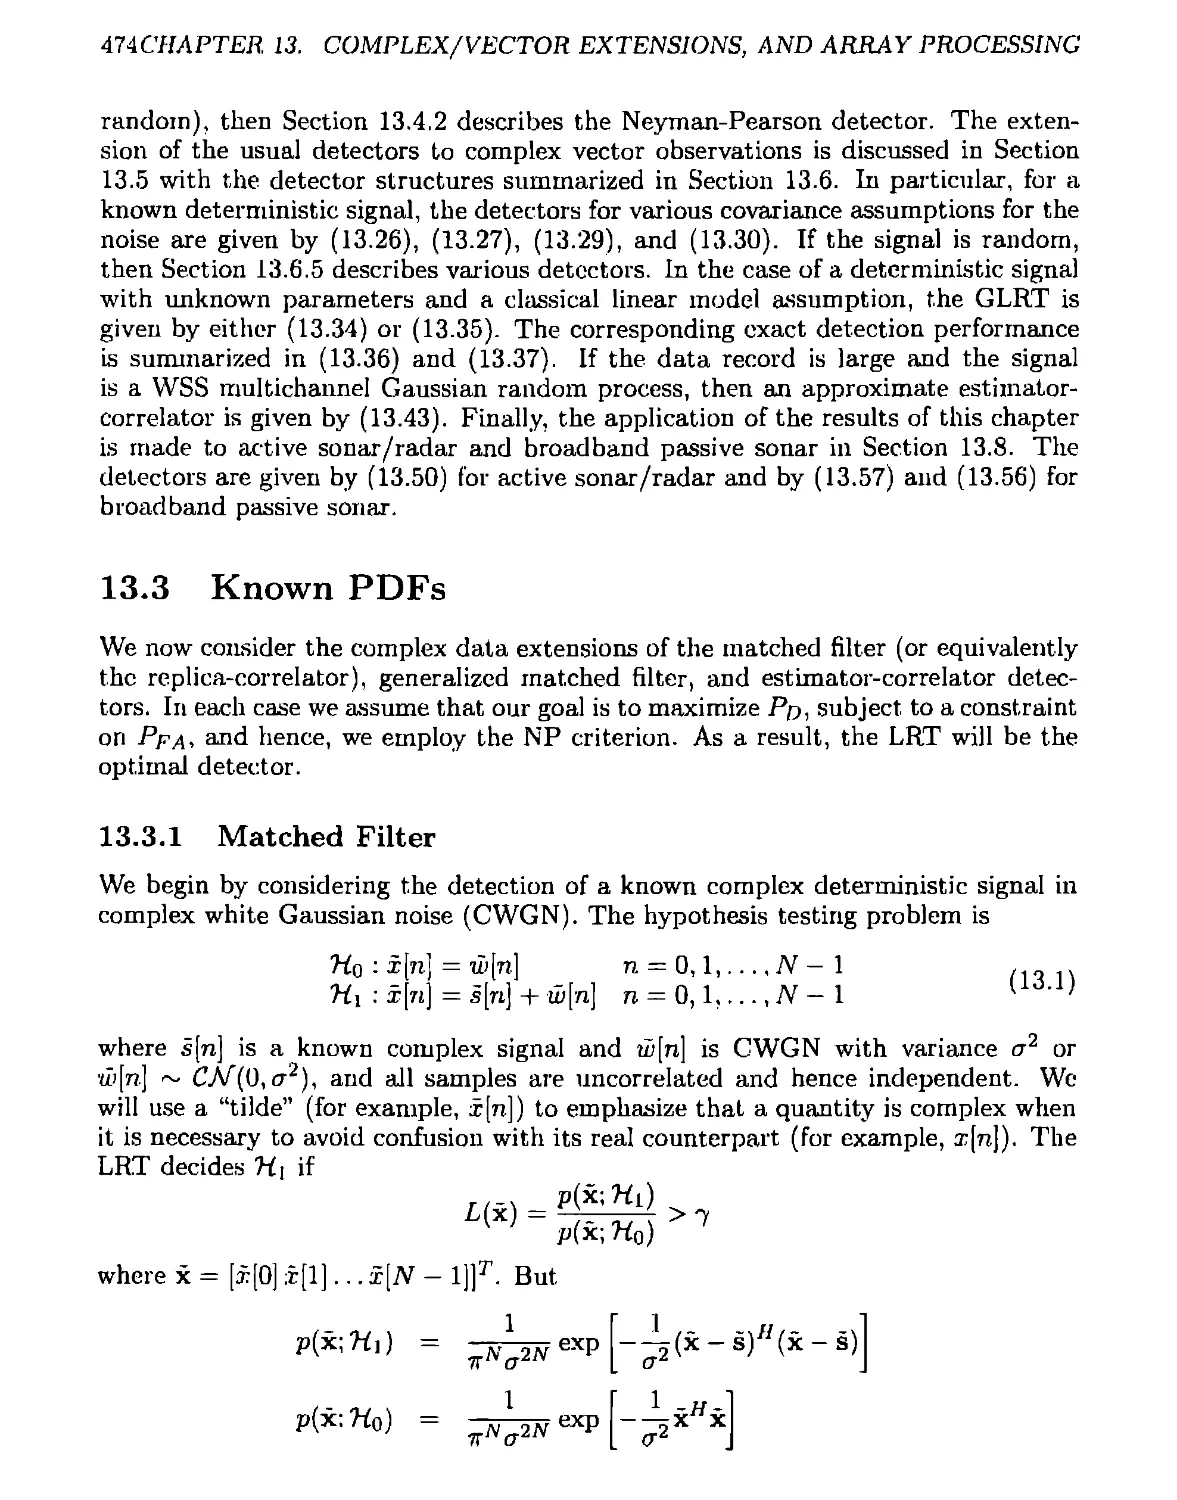 13.3 Known PDFs